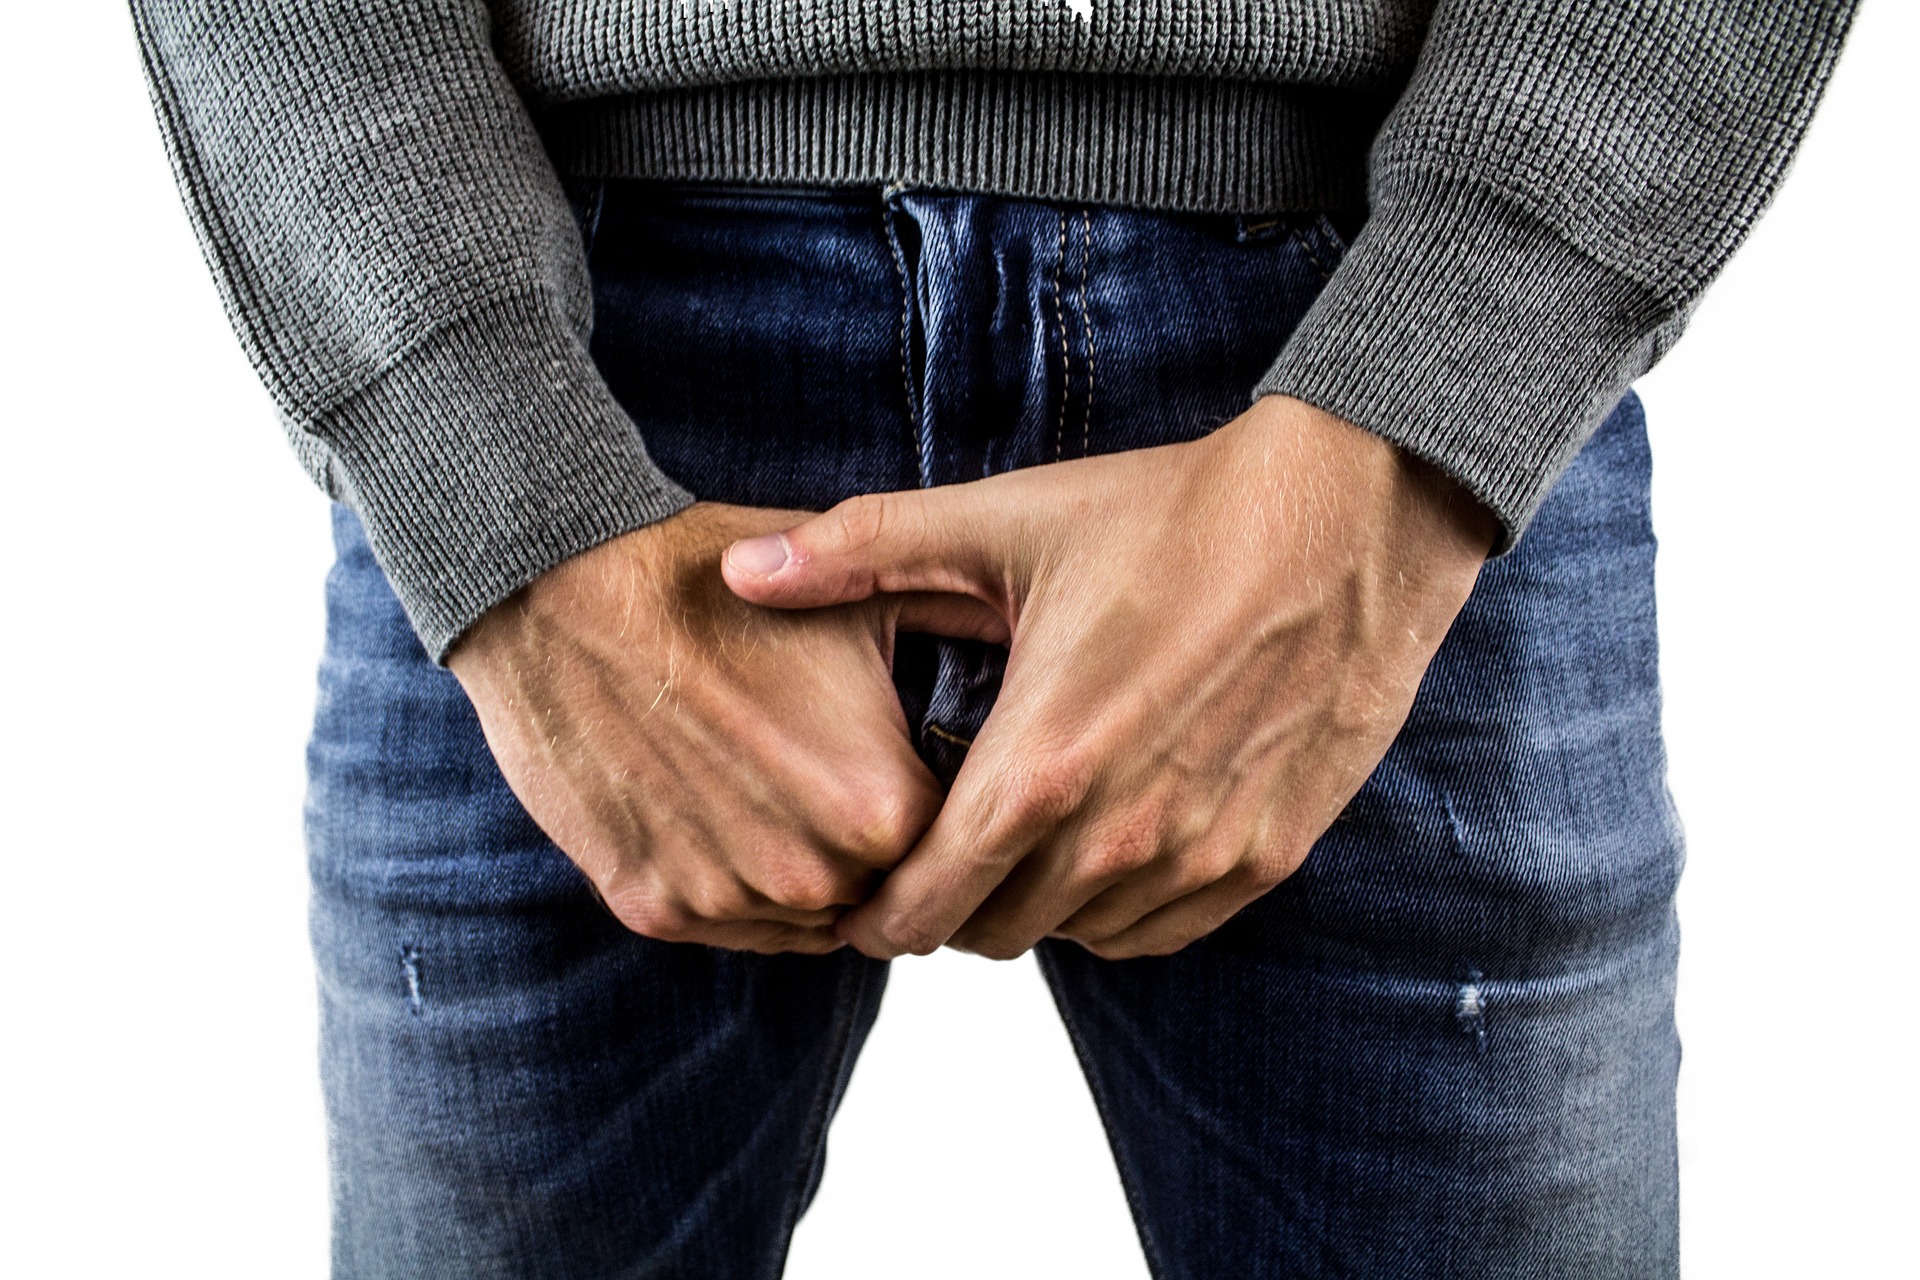 Men With Autism Or ADHD Are Slightly More Susceptible To Testicular Cancer, Study Finds